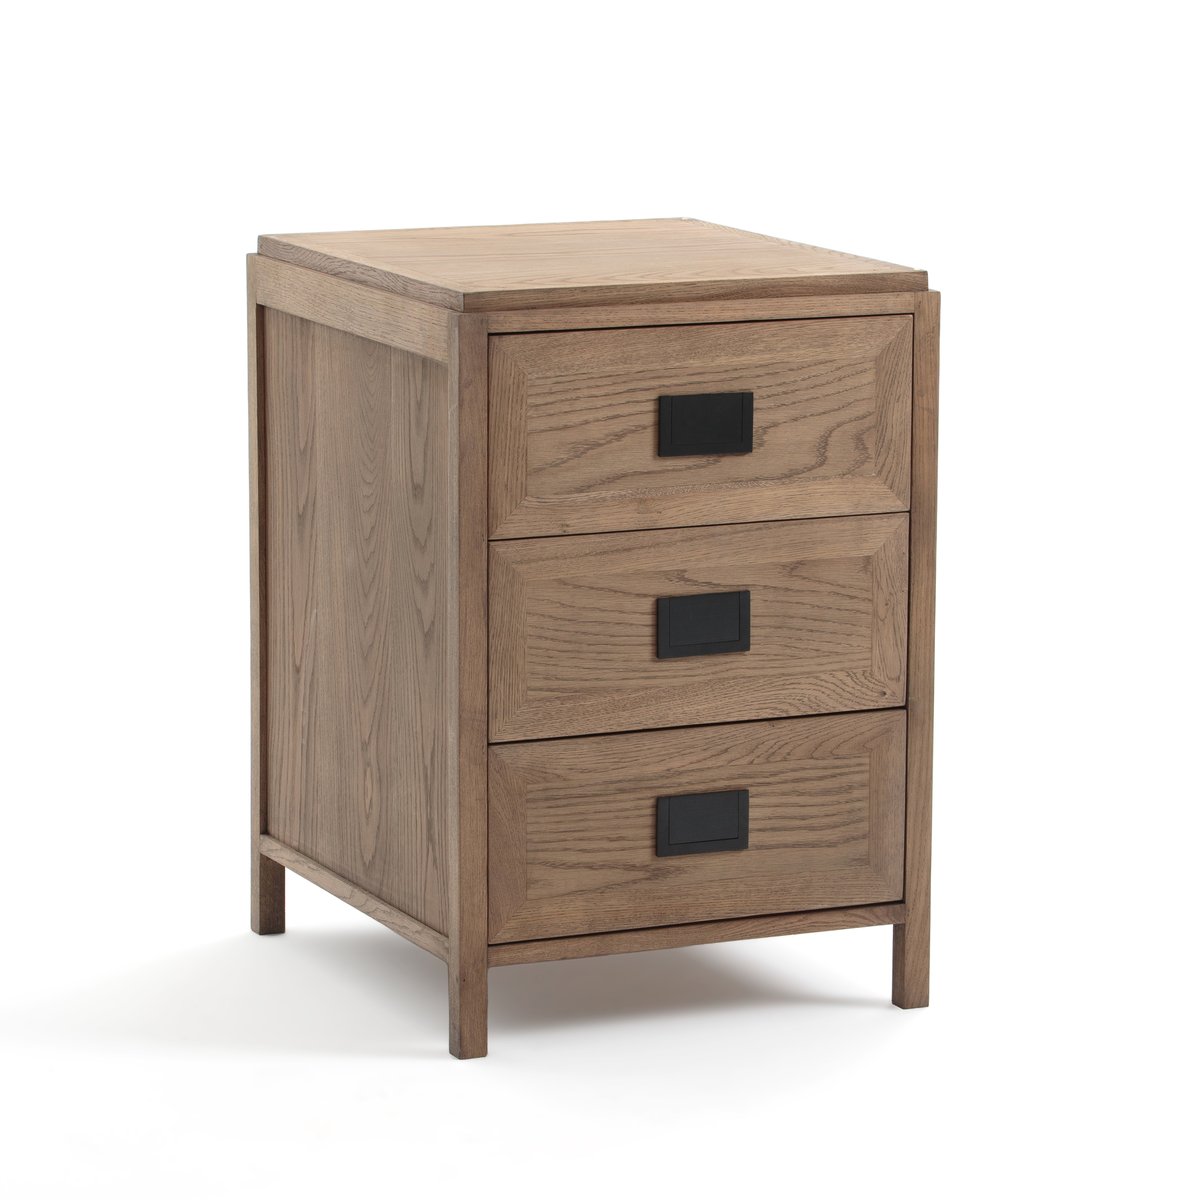 Image of LING Solid Oak 3 Drawer Chest